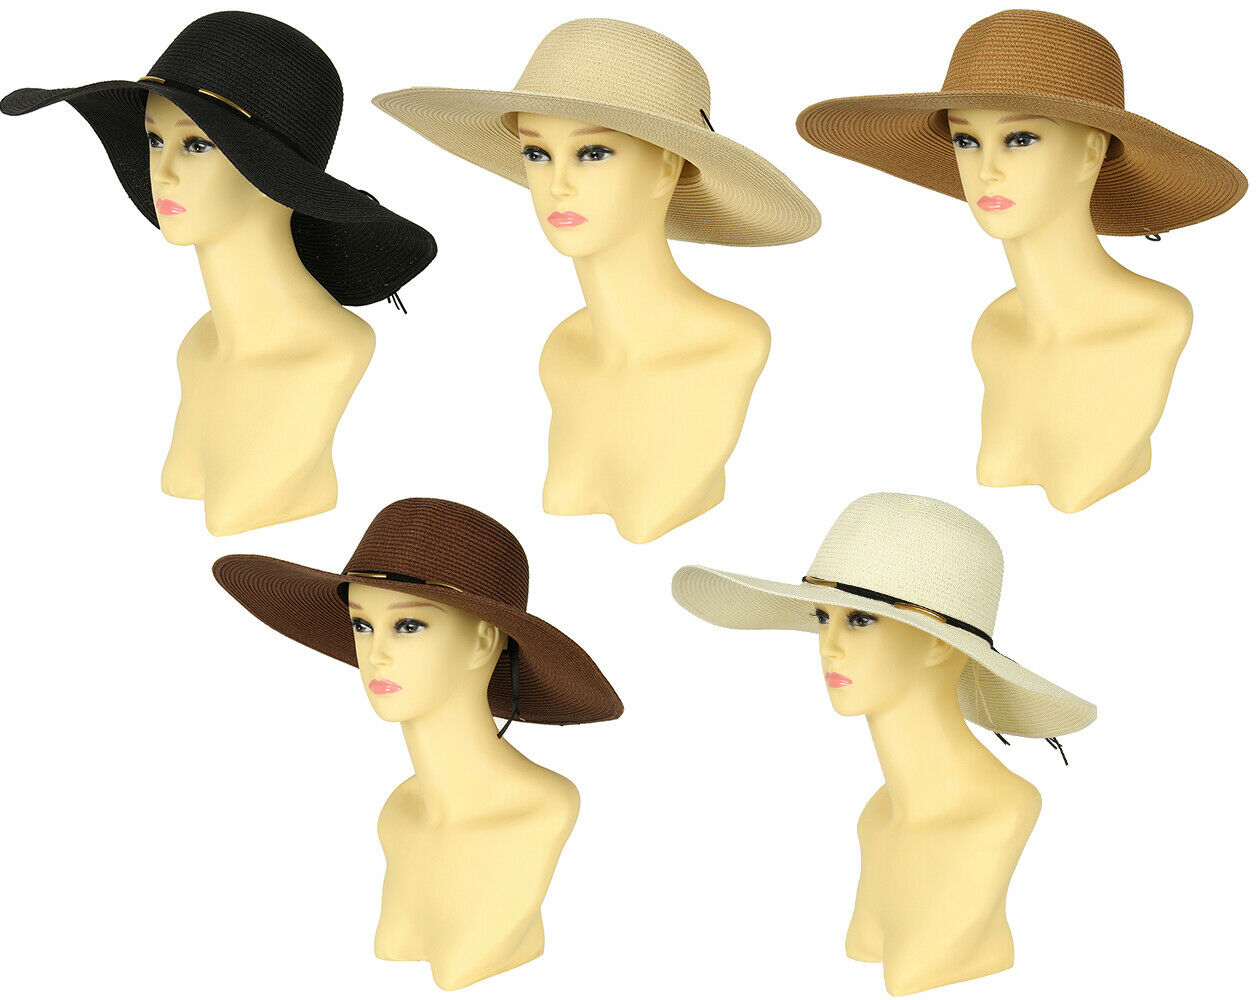 https://peppertreelondon.co.uk/wp-content/uploads/imported/9/NEW-PAPER-STRAW-WIDE-LARGE-BRIM-SUMMER-SUN-BEACH-FLOPPY-HAT-NEW-H-0349-254670689199.jpg